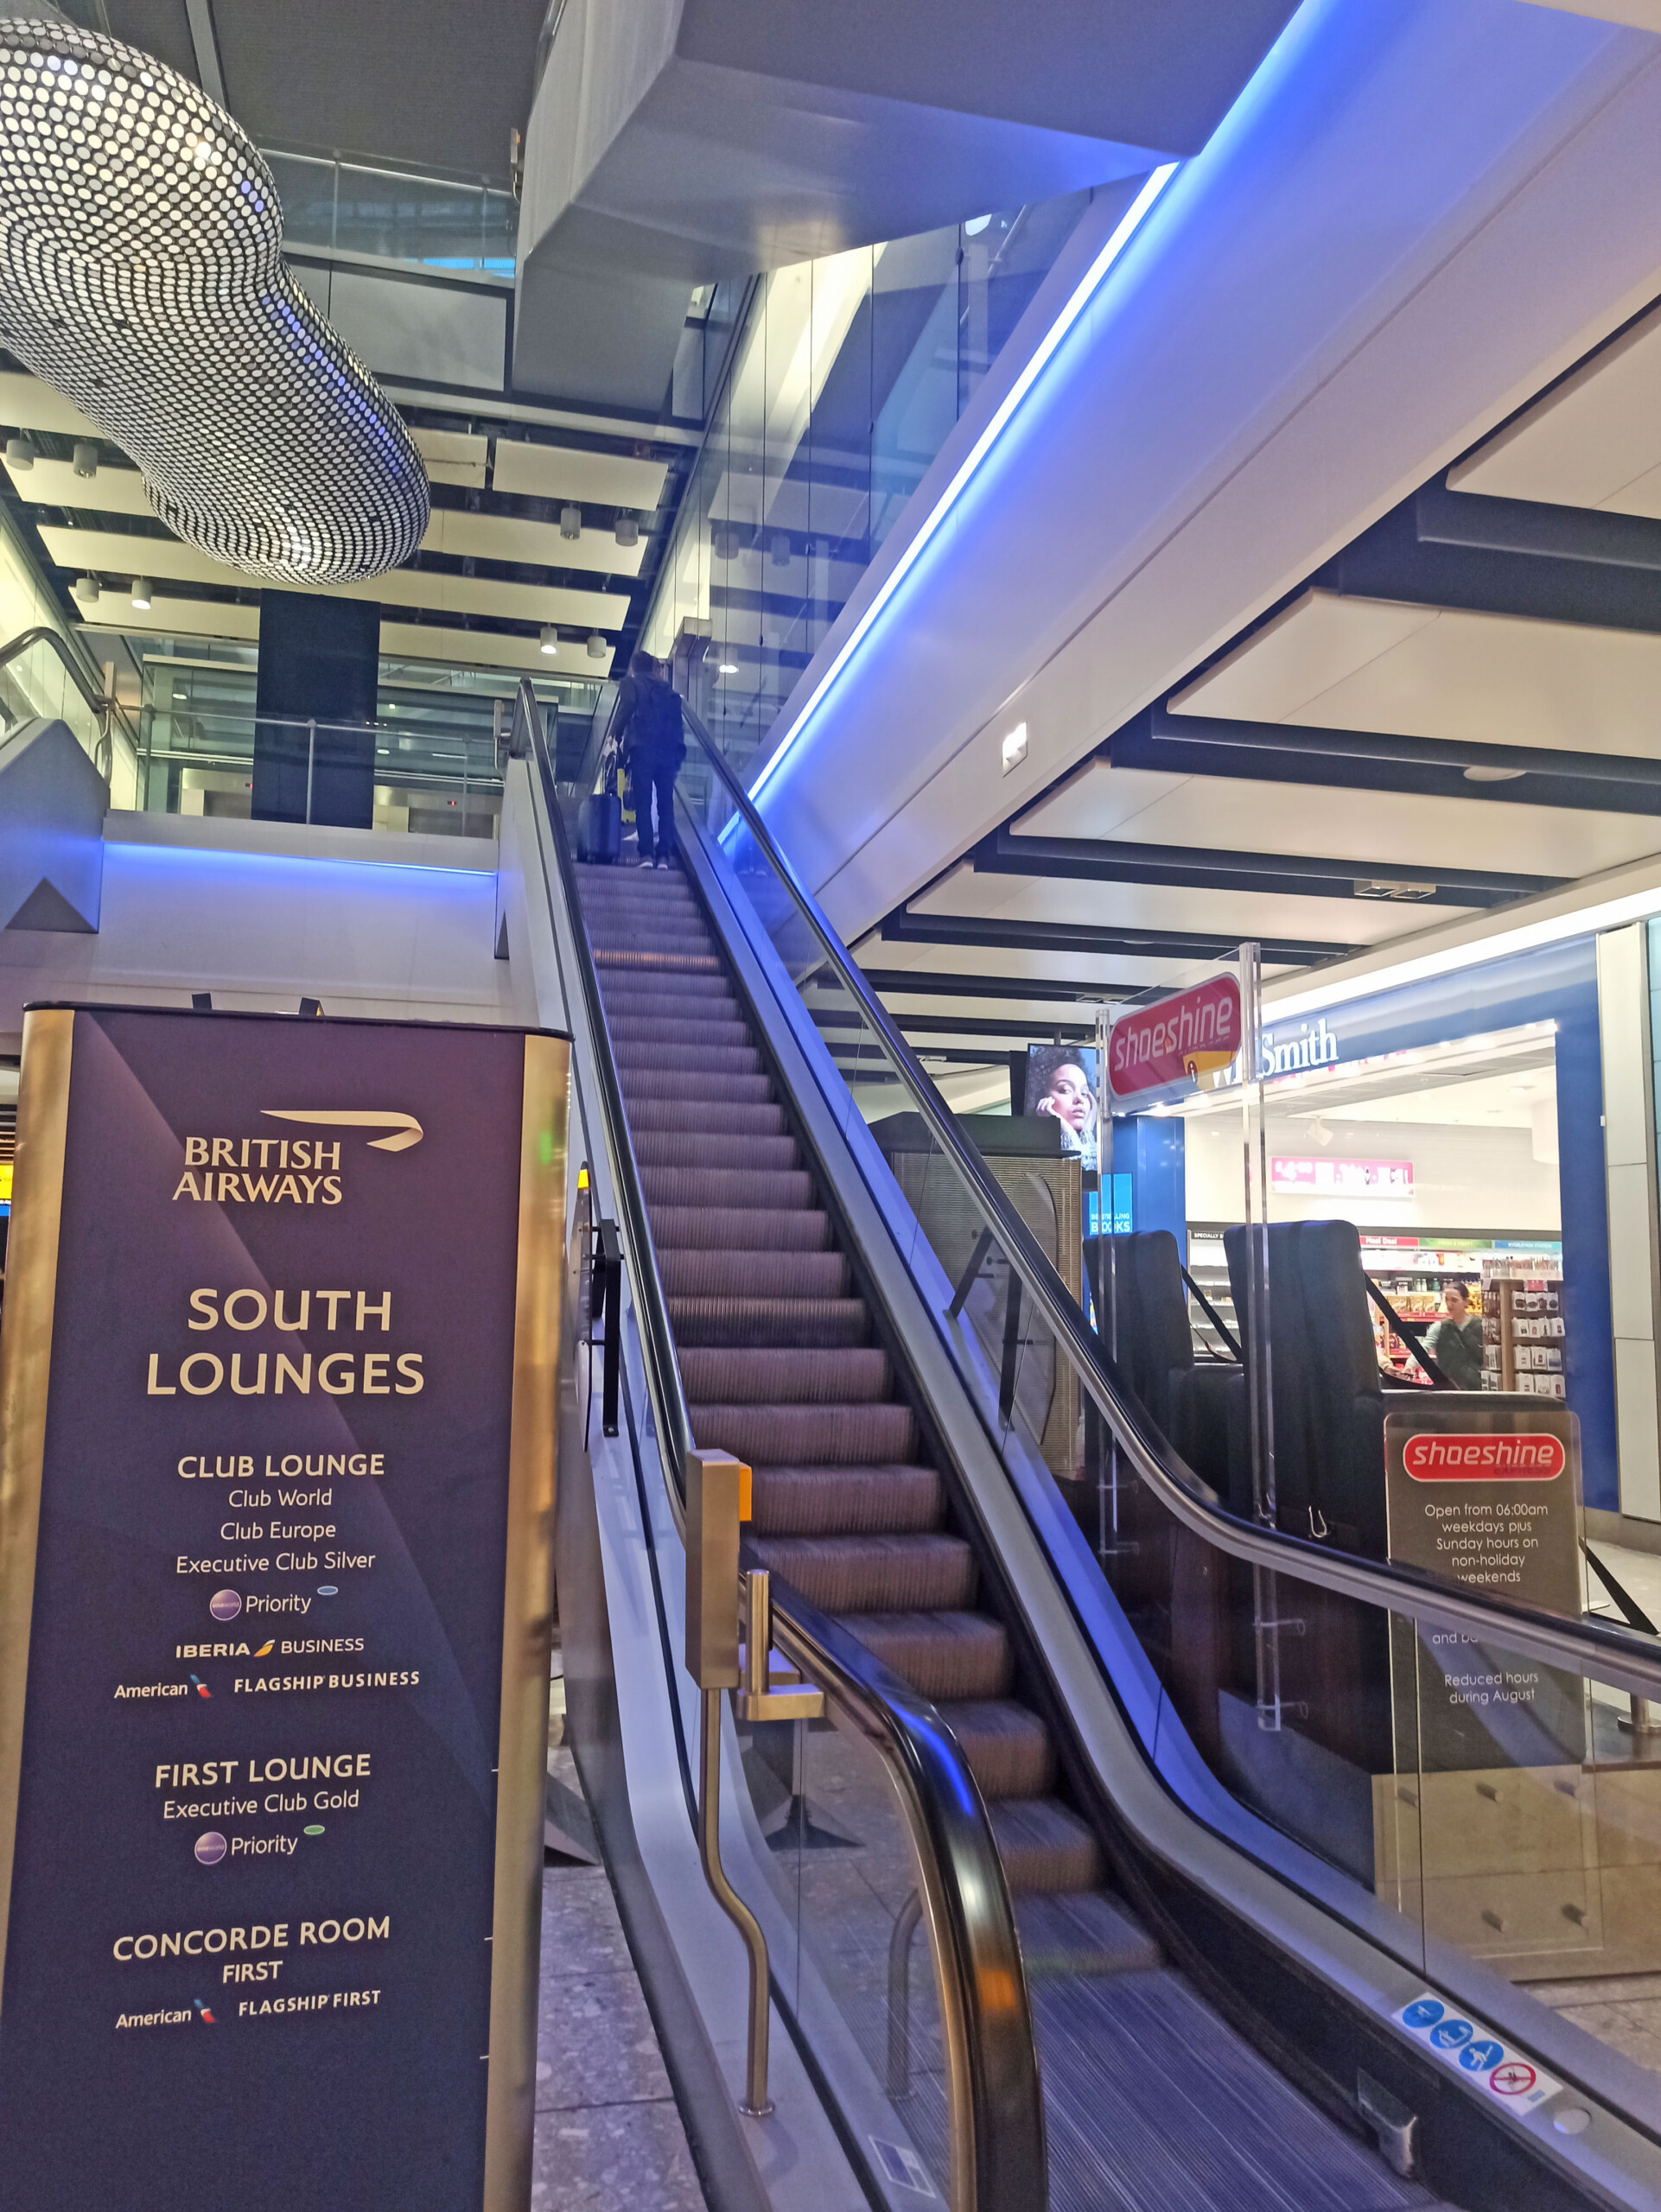 Entrance to British Airways Club Lounge South